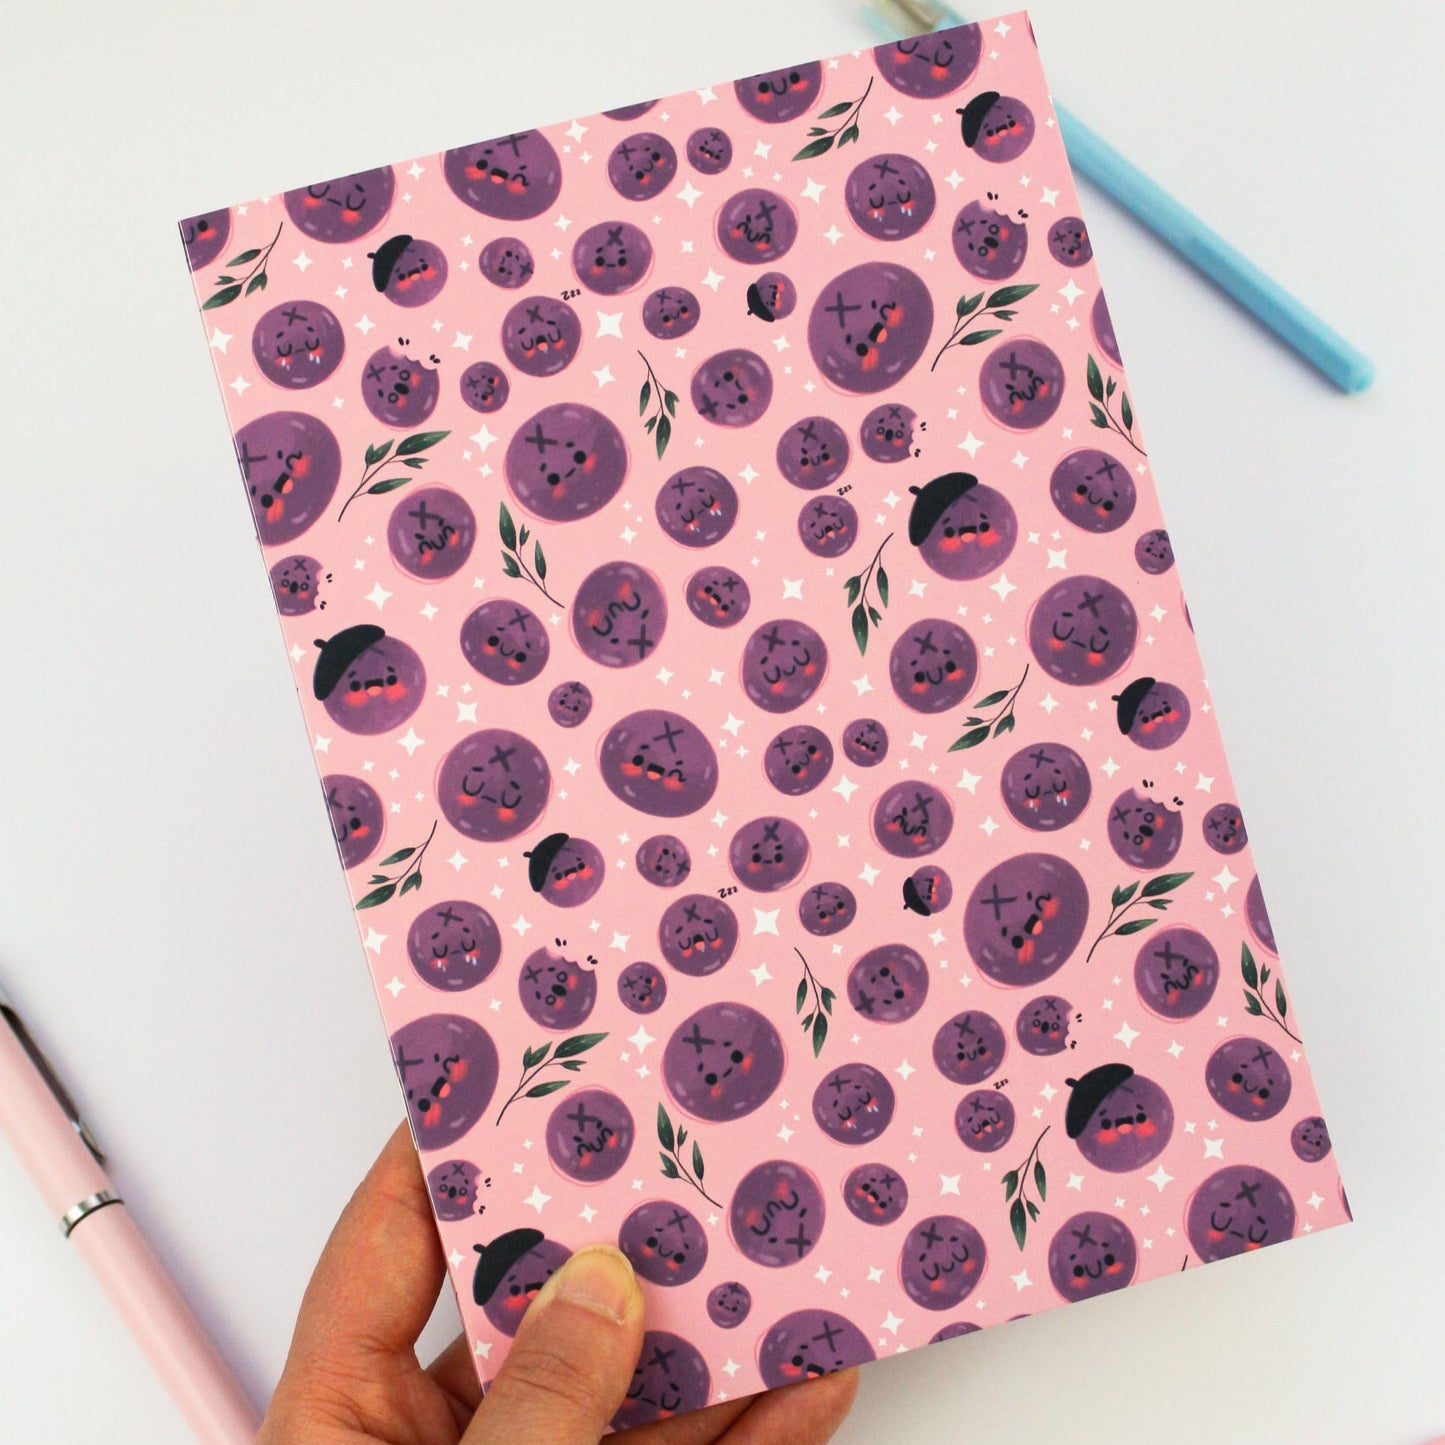 Blueberry notebook - Summer Stationery gift